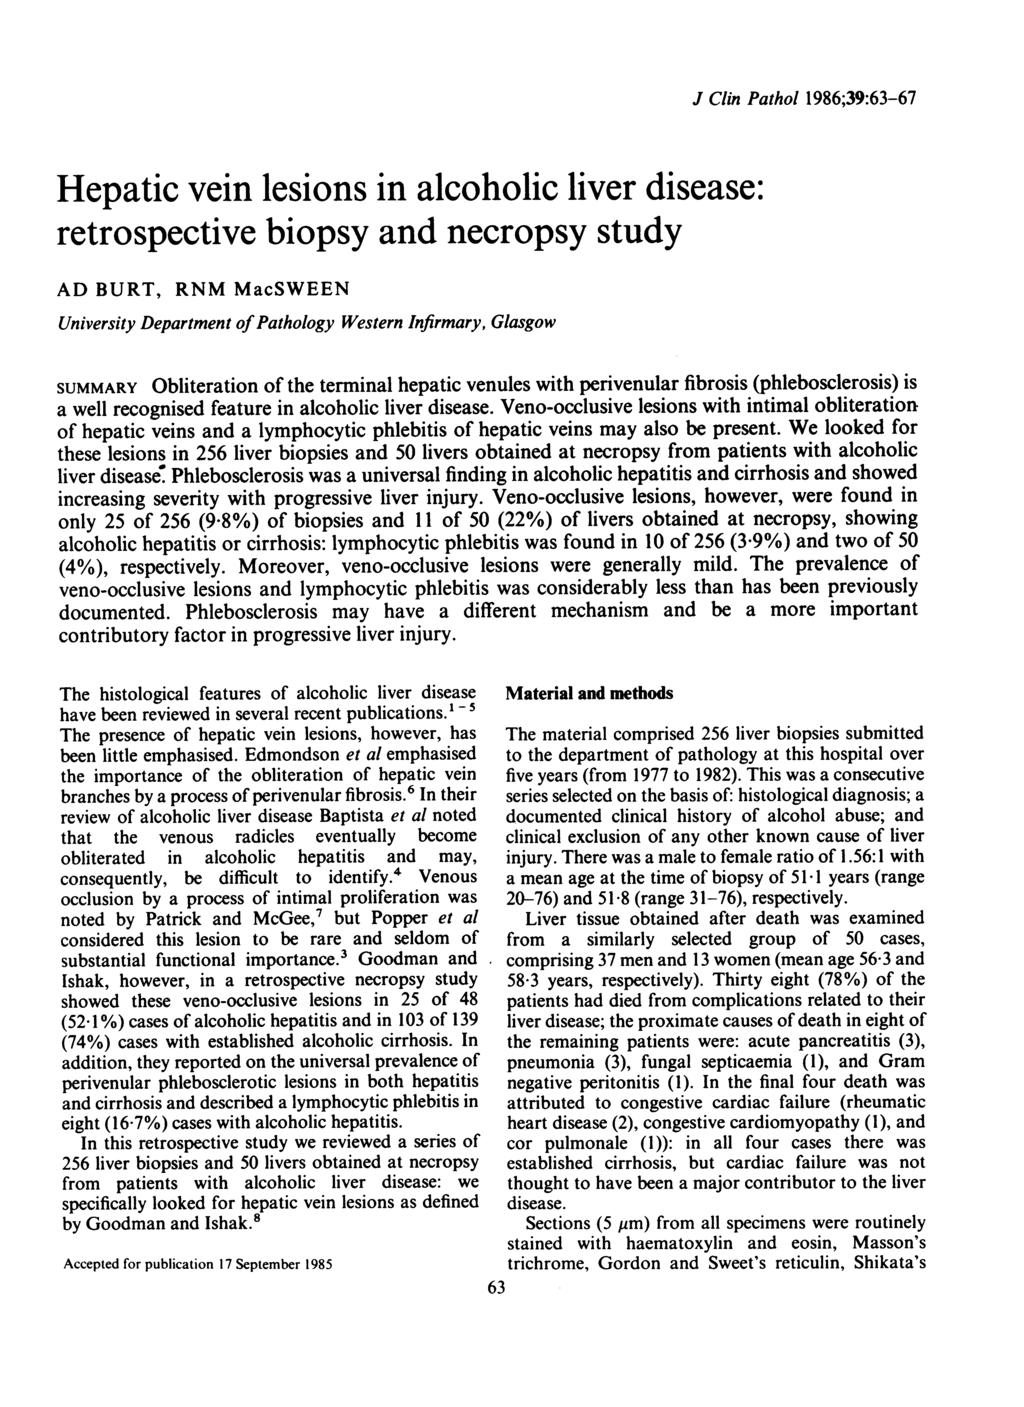 Hepatic vein lesions in alcoholic liver disease: retrospective biopsy and necropsy study AD BURT, RNM MacSWEEN University Department of Pathology Western Infirmary, Glasgow J Clin Pathol